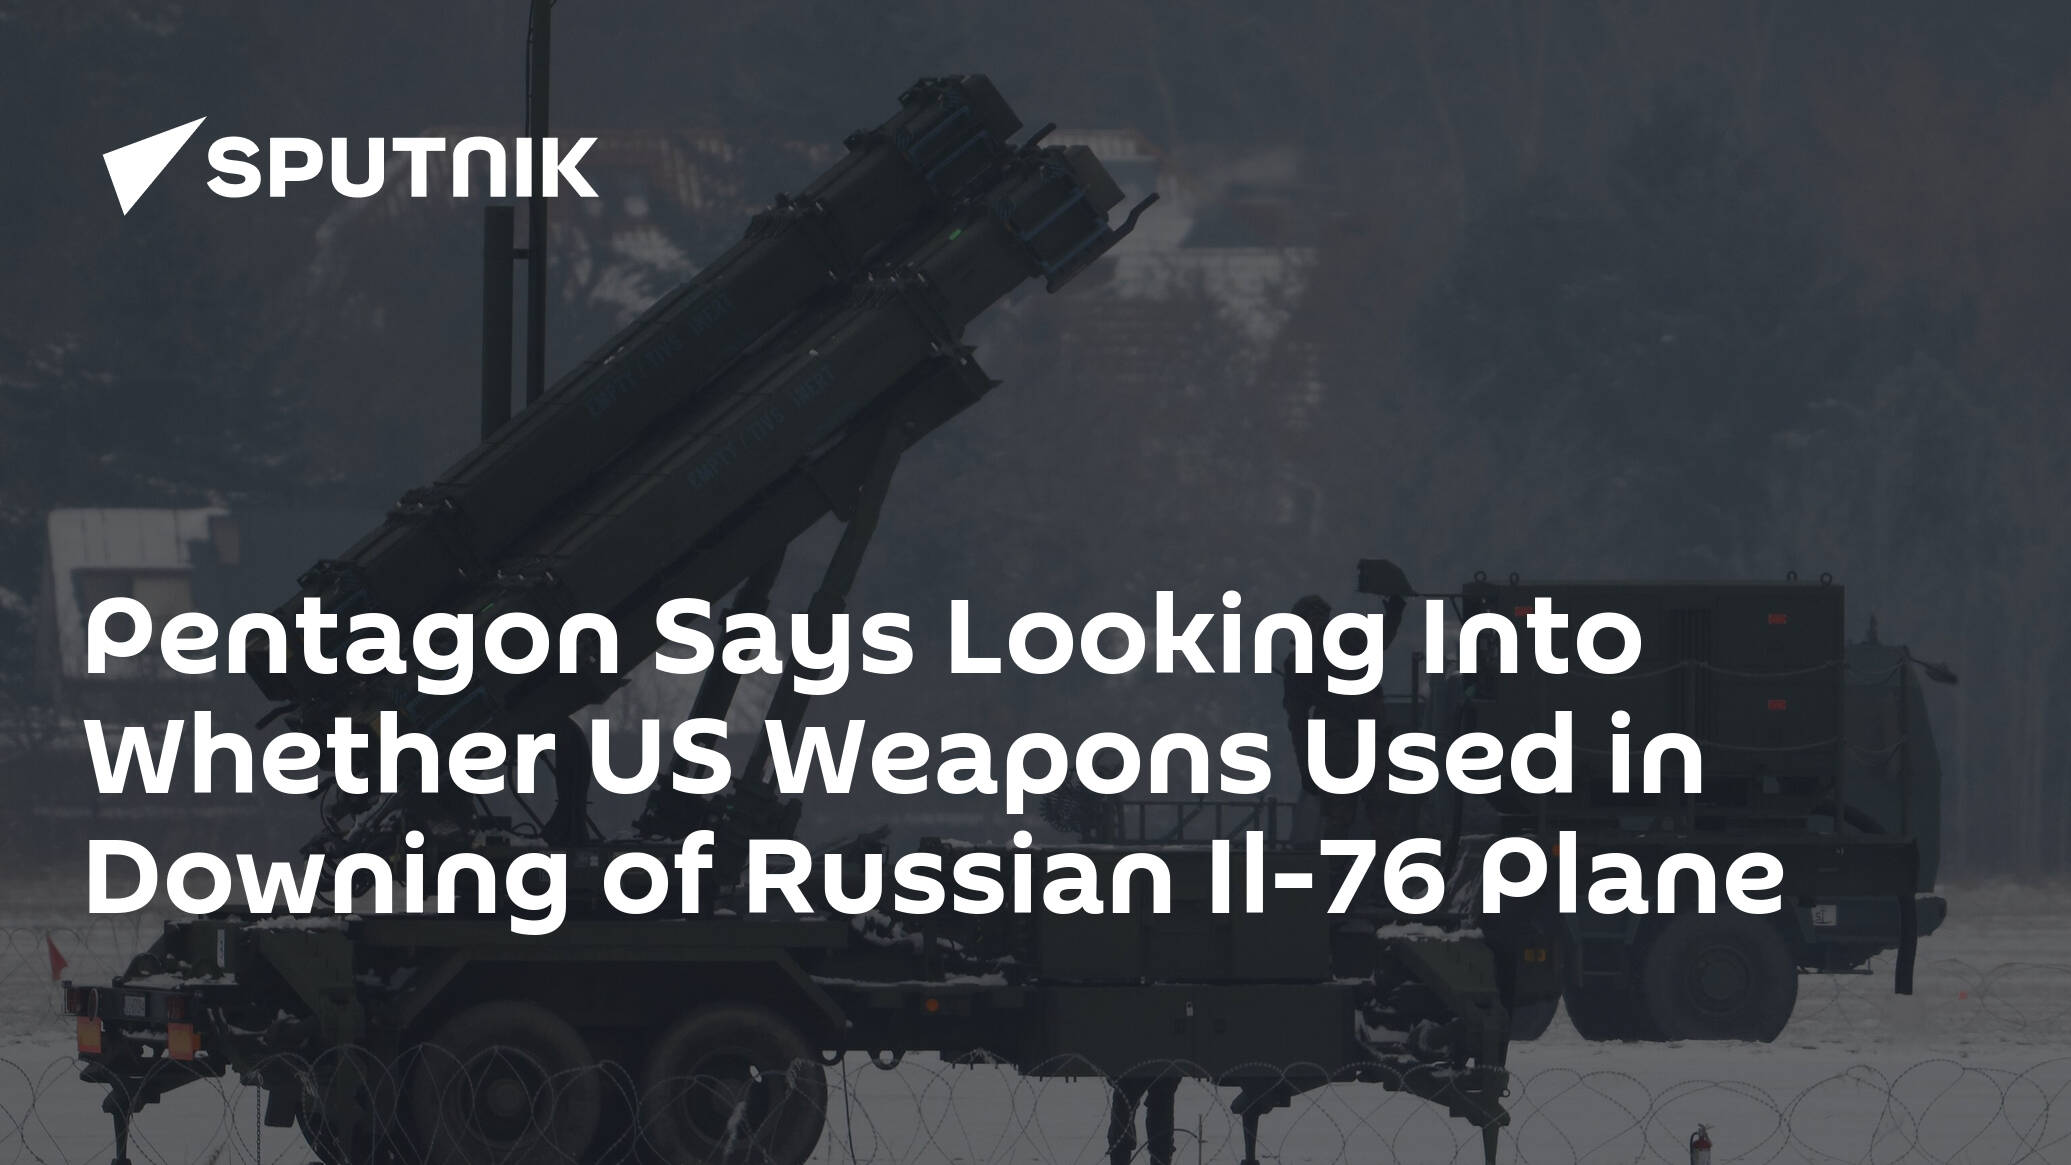 Pentagon Says Looking Into Whether US Weapons Used in Downing of Russian Il-76 Plane